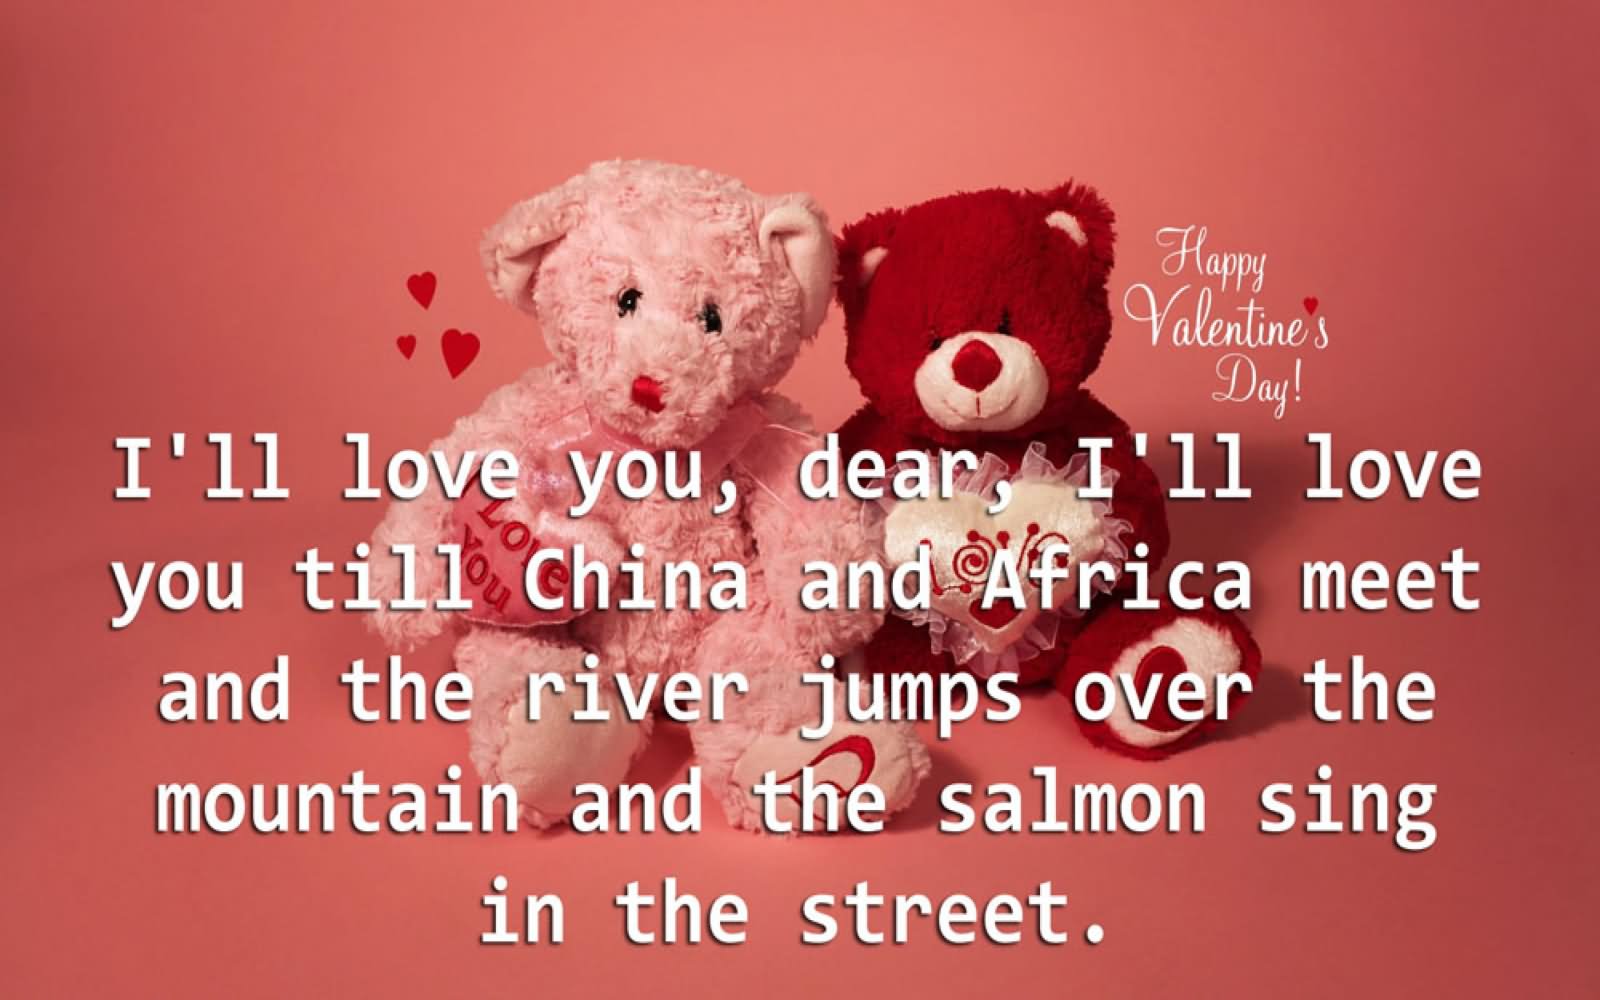 I ll love you till China and Africa meet and the river jumps over the mountain and the salmon sing in the street